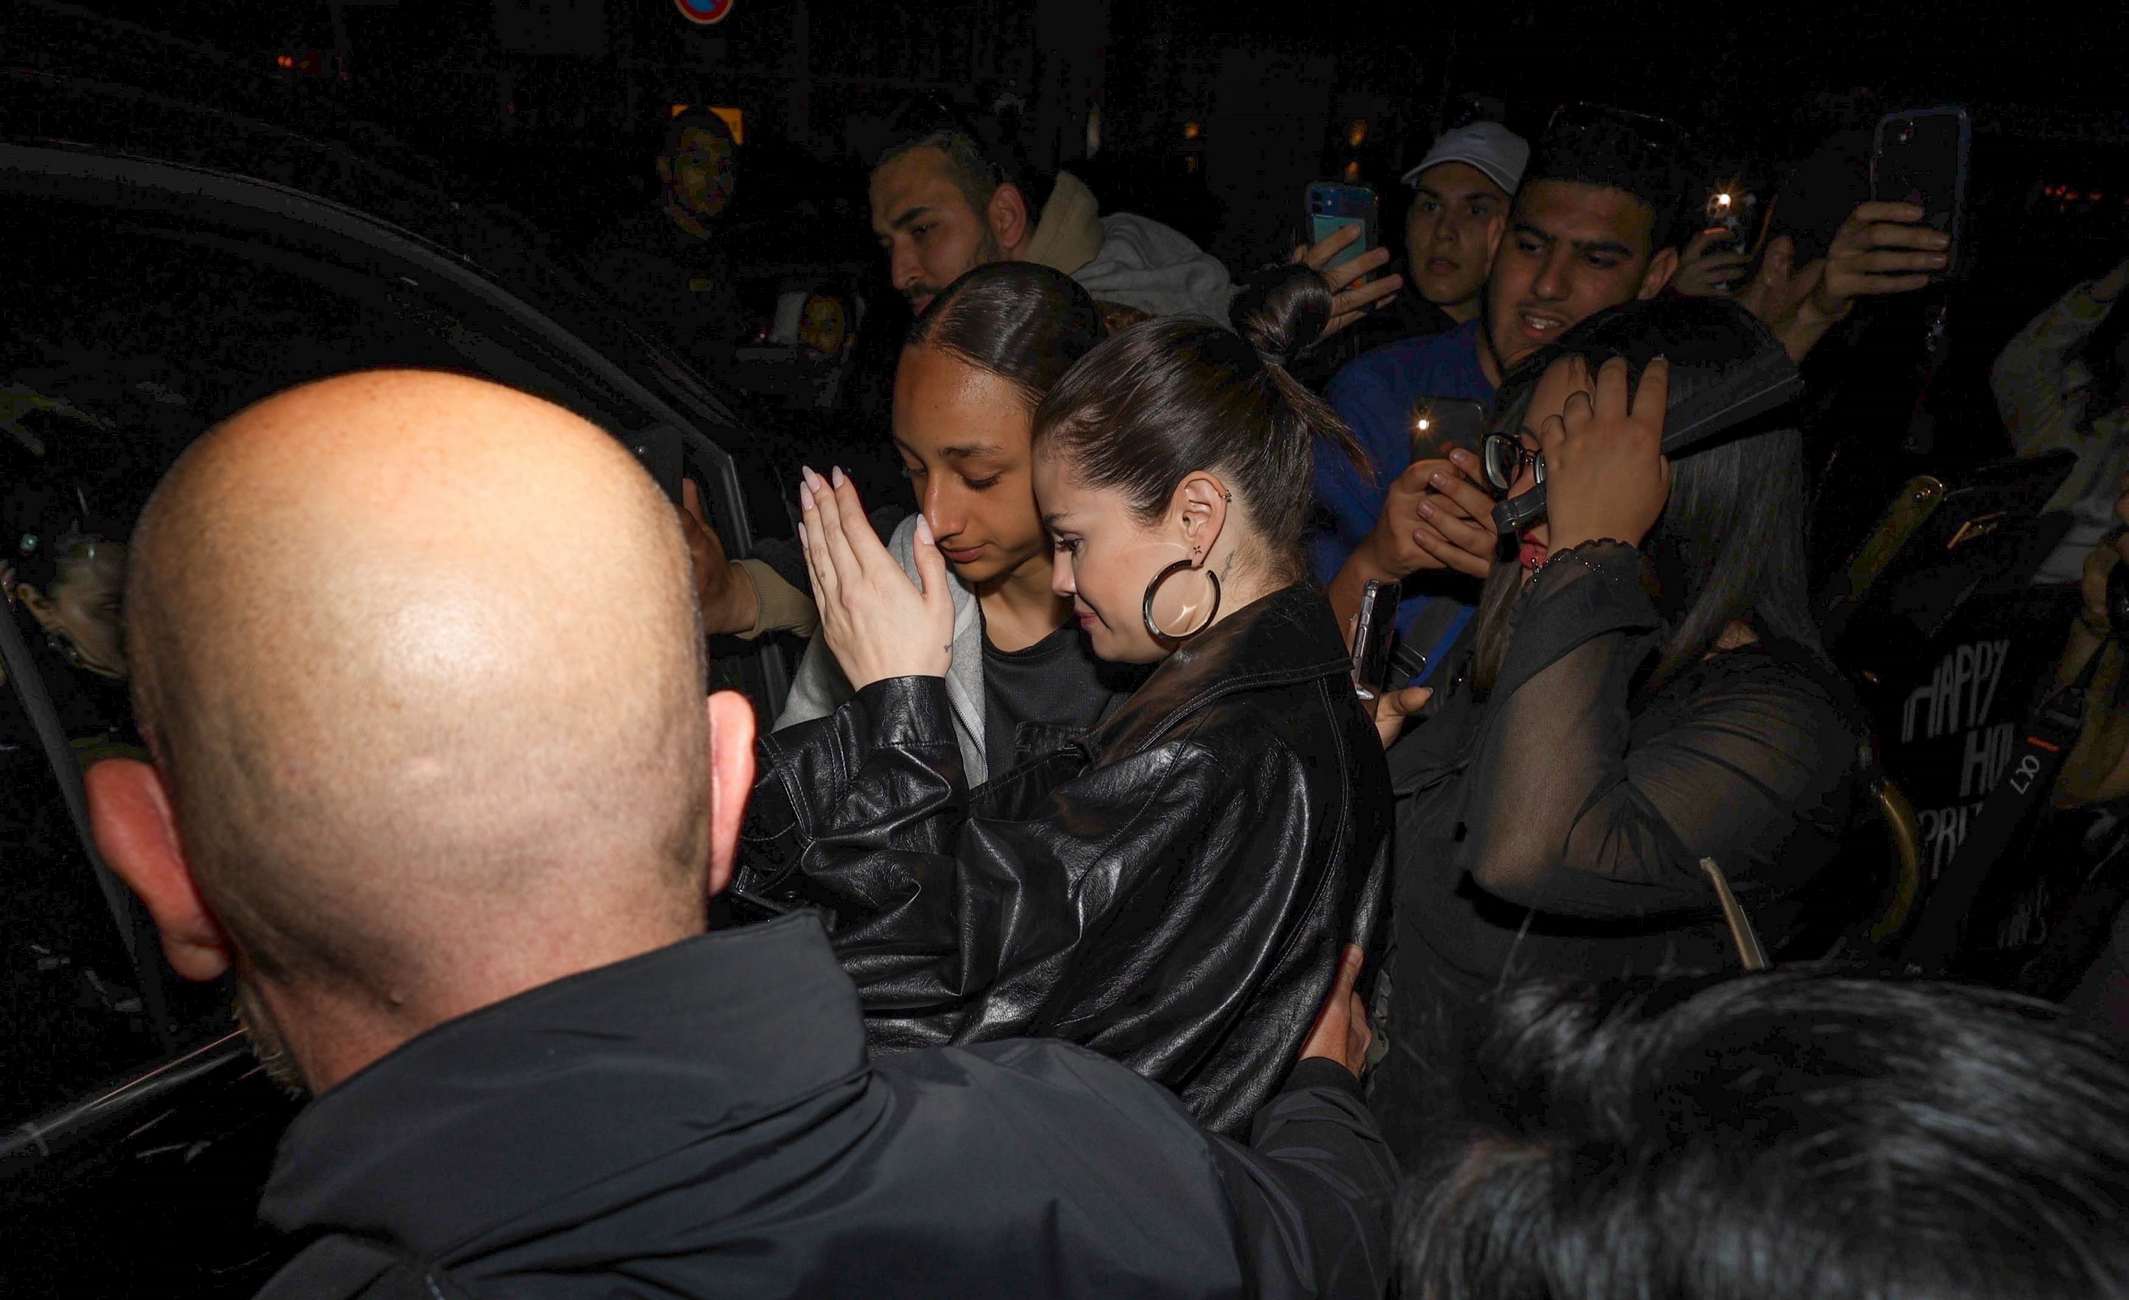 Selena_Gomez_-_is_spotted_during_a_night_out_in_Paris2C_France__0527202316.jpg